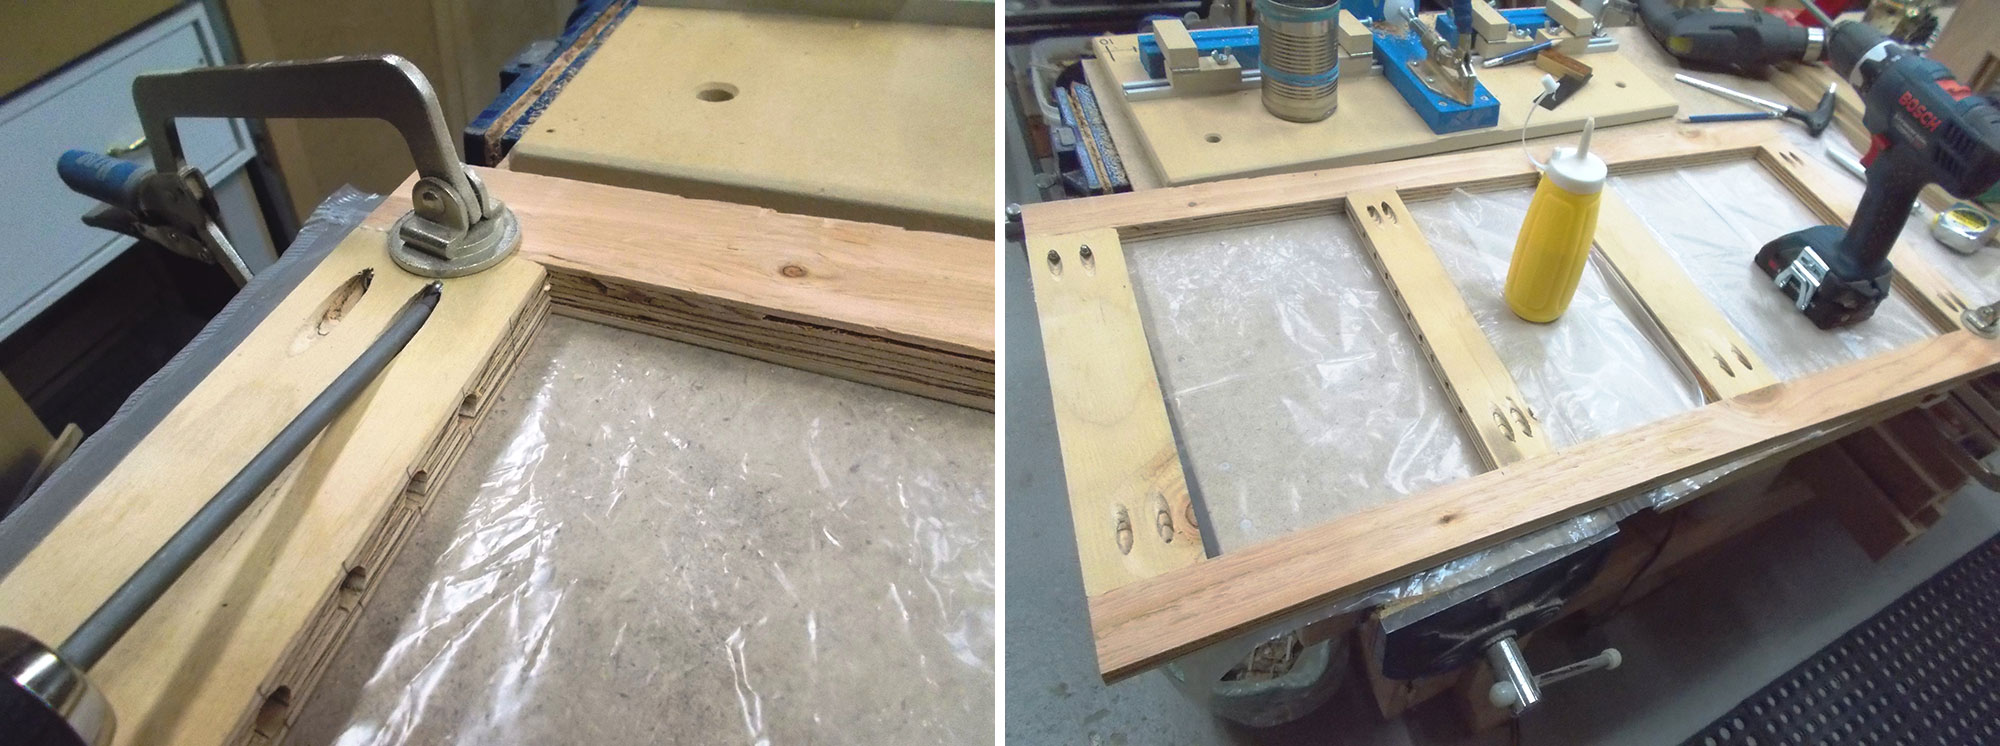 Image left: Using a clamp to even out the joints. Image right: Cereal box plastic bags protect work surfaces.